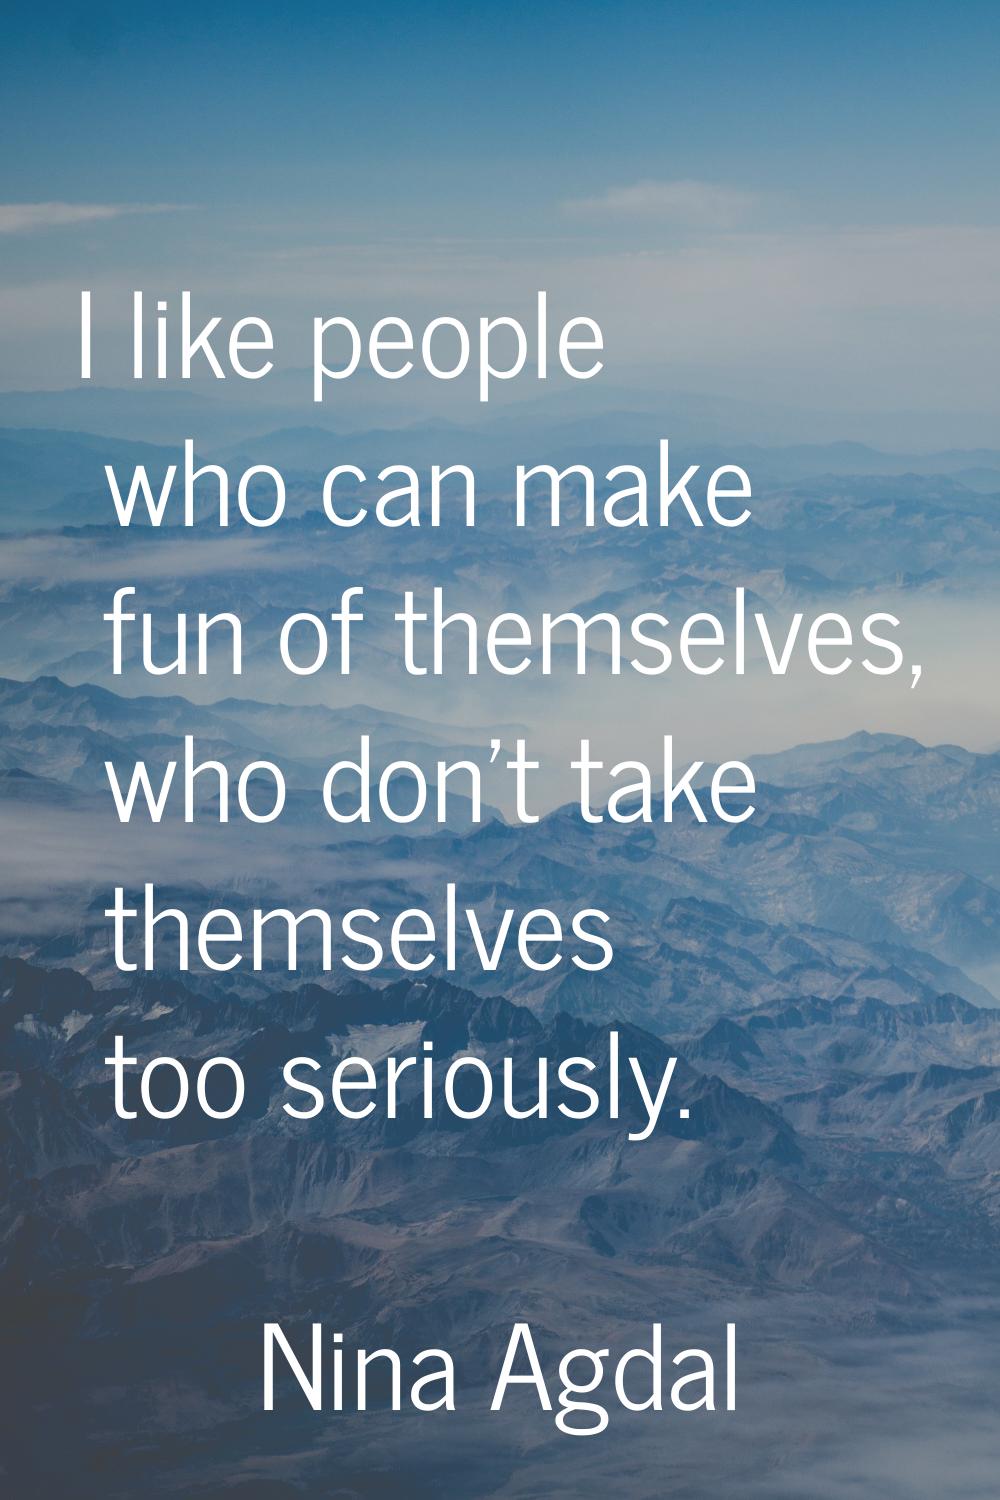 I like people who can make fun of themselves, who don't take themselves too seriously.